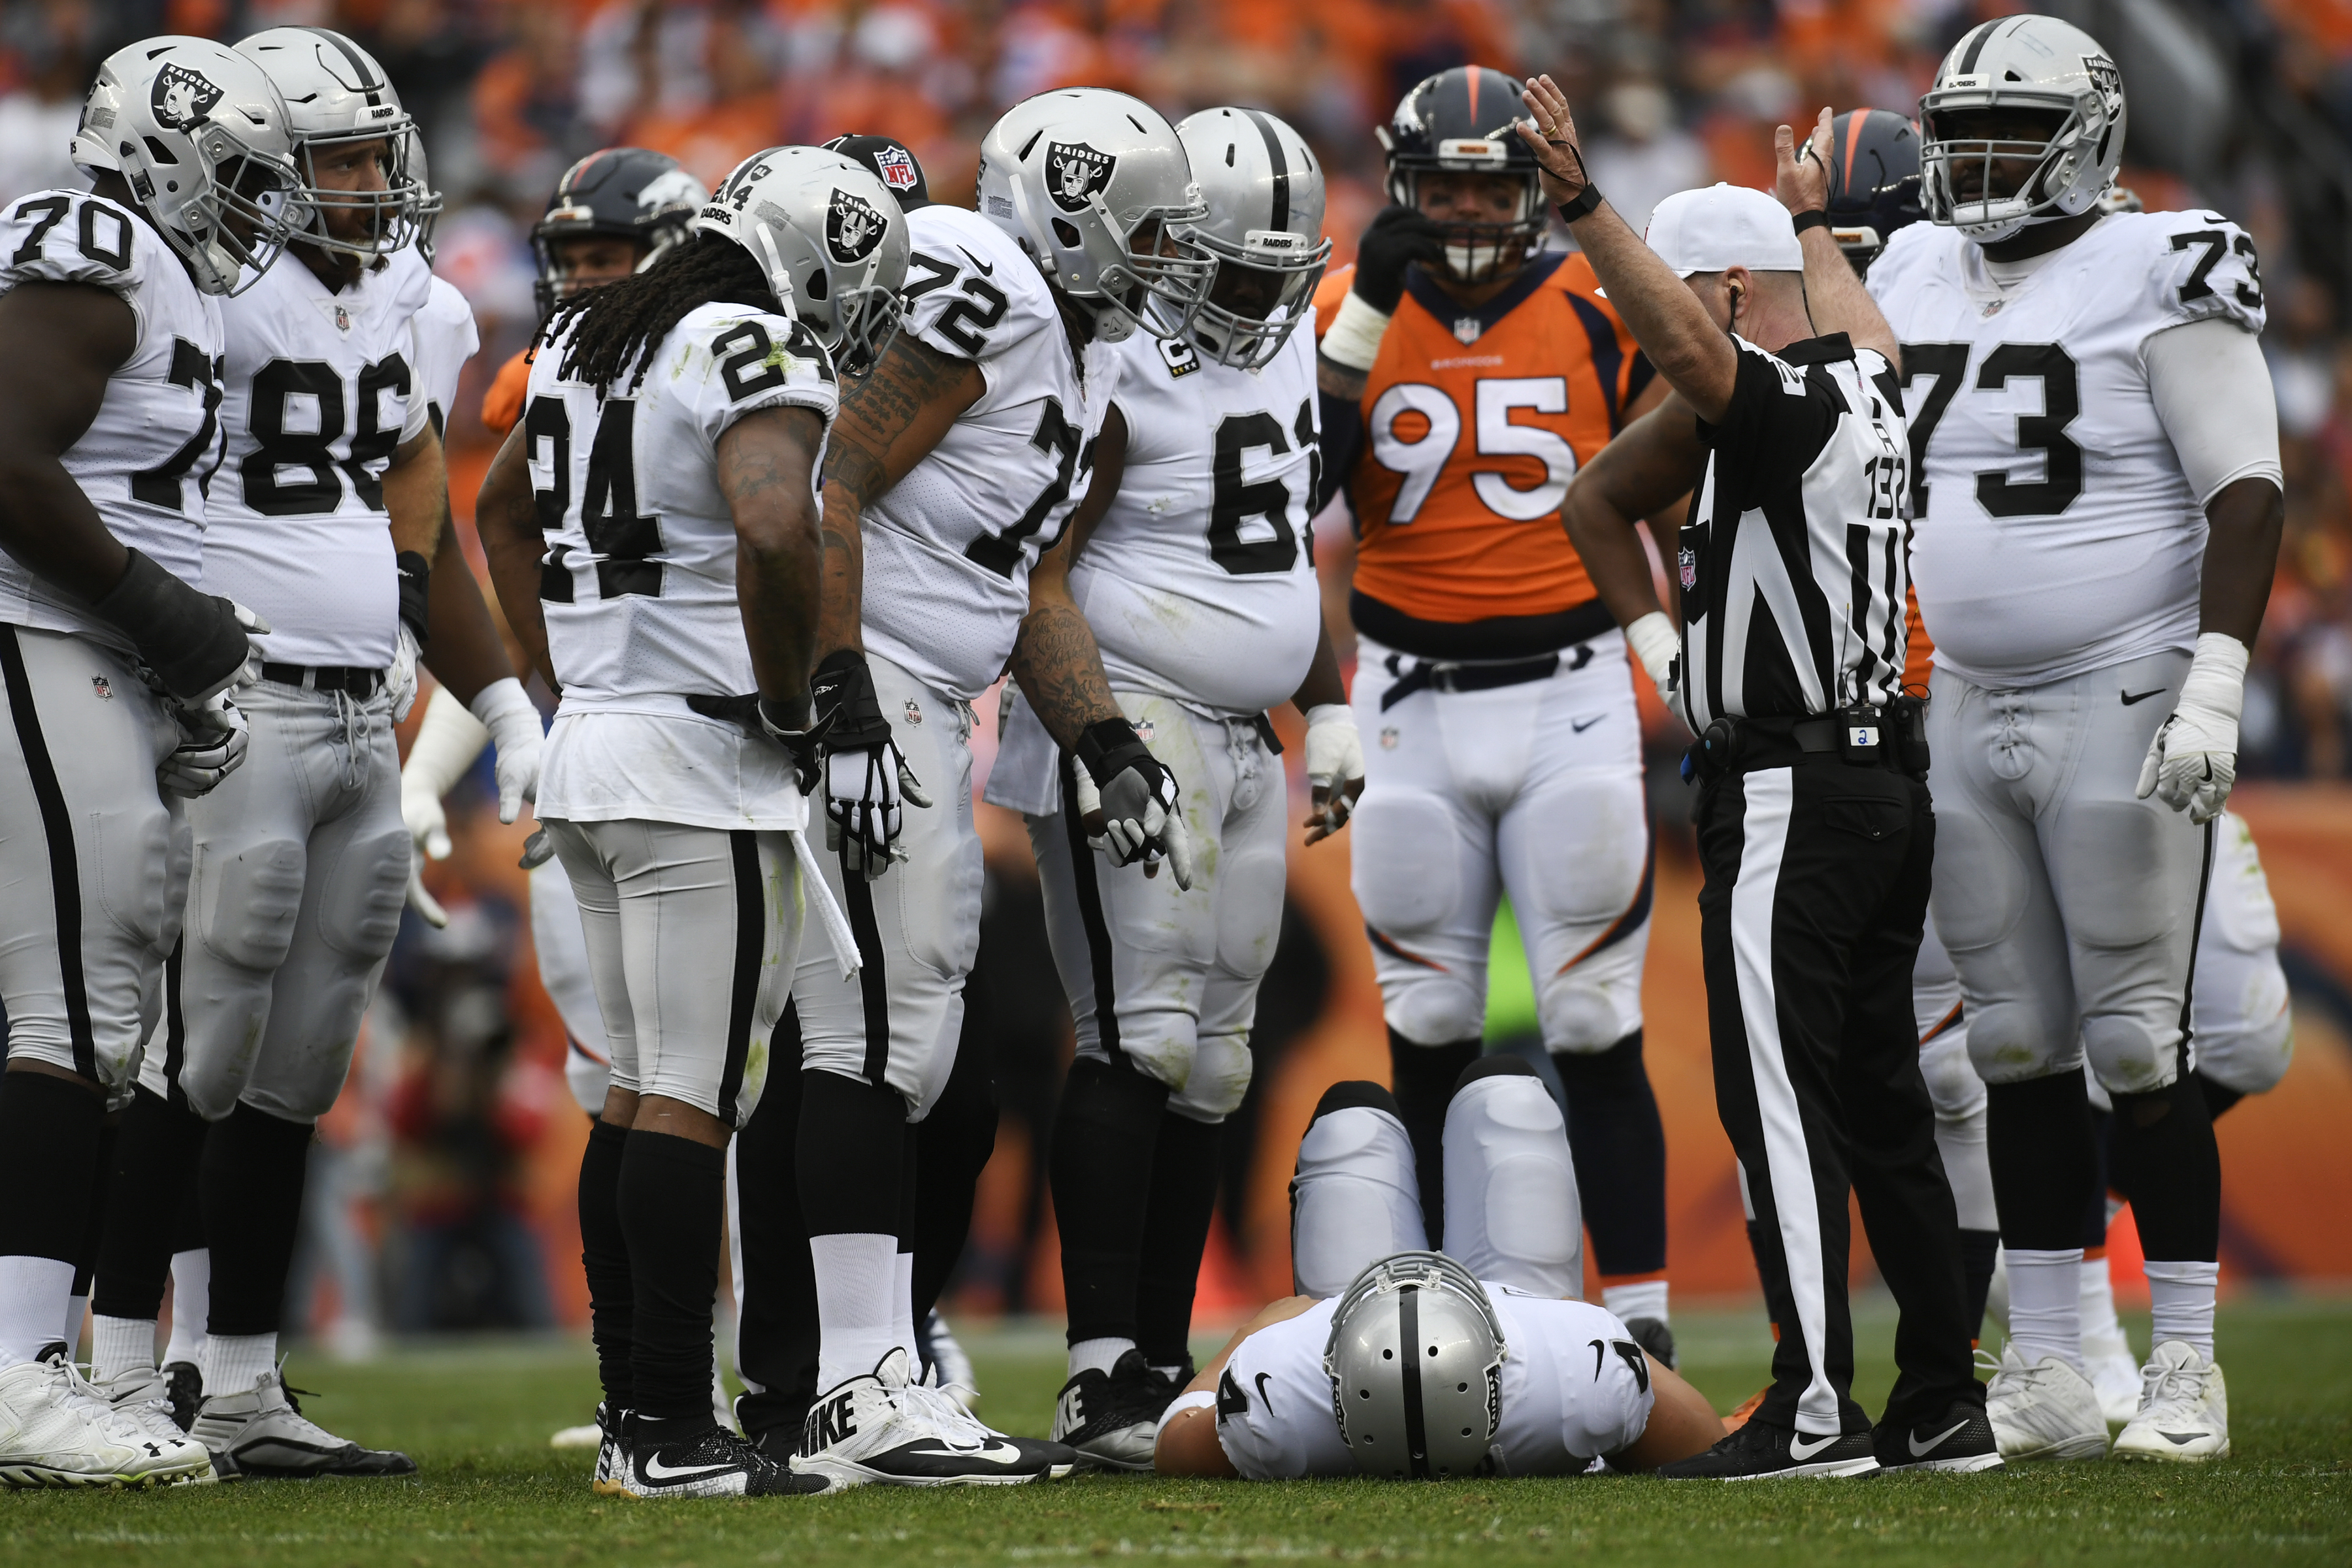 DENVER, CO - OCTOBER 01: Derek Carr (4) of the Oakland Raiders lies on the grass after being hit in the back by Adam Gotsis (99) of the Denver Broncos during the third quarter on Sunday, October 1, 2017. The Denver Broncos hosted the Oakland Raiders.